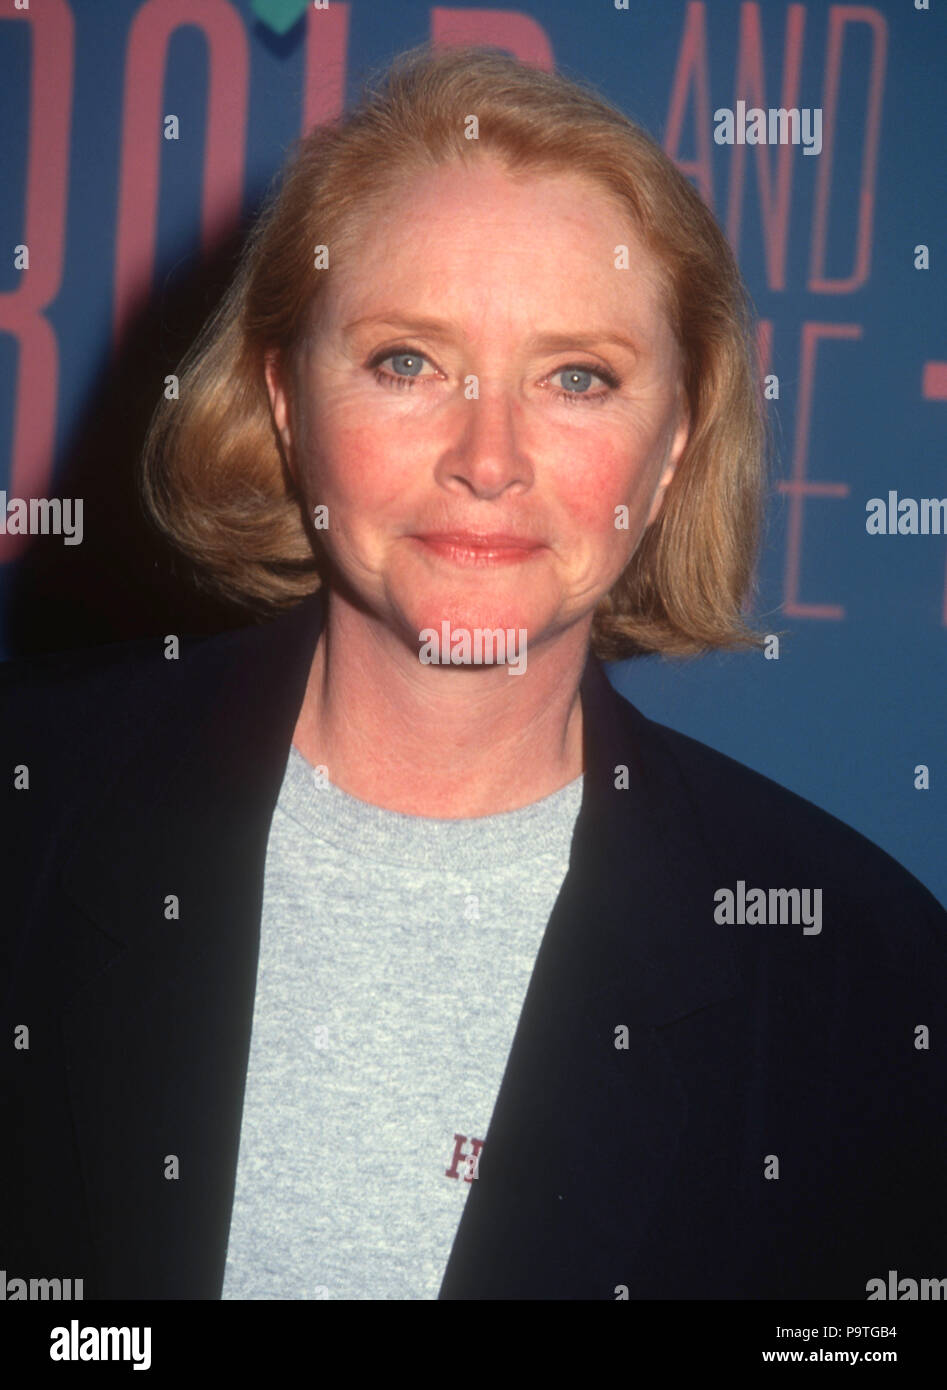 LOS ANGELES, CA - MARCH 23: Actress Susan Flannery attends 5th Anniversary Celebration for 'The Bold and the Beautiful' soap opera on March 23, 1992 at CBS Television City in Los Angeles, California. Photo by Barry King/Alamy Stock Photo Stock Photo